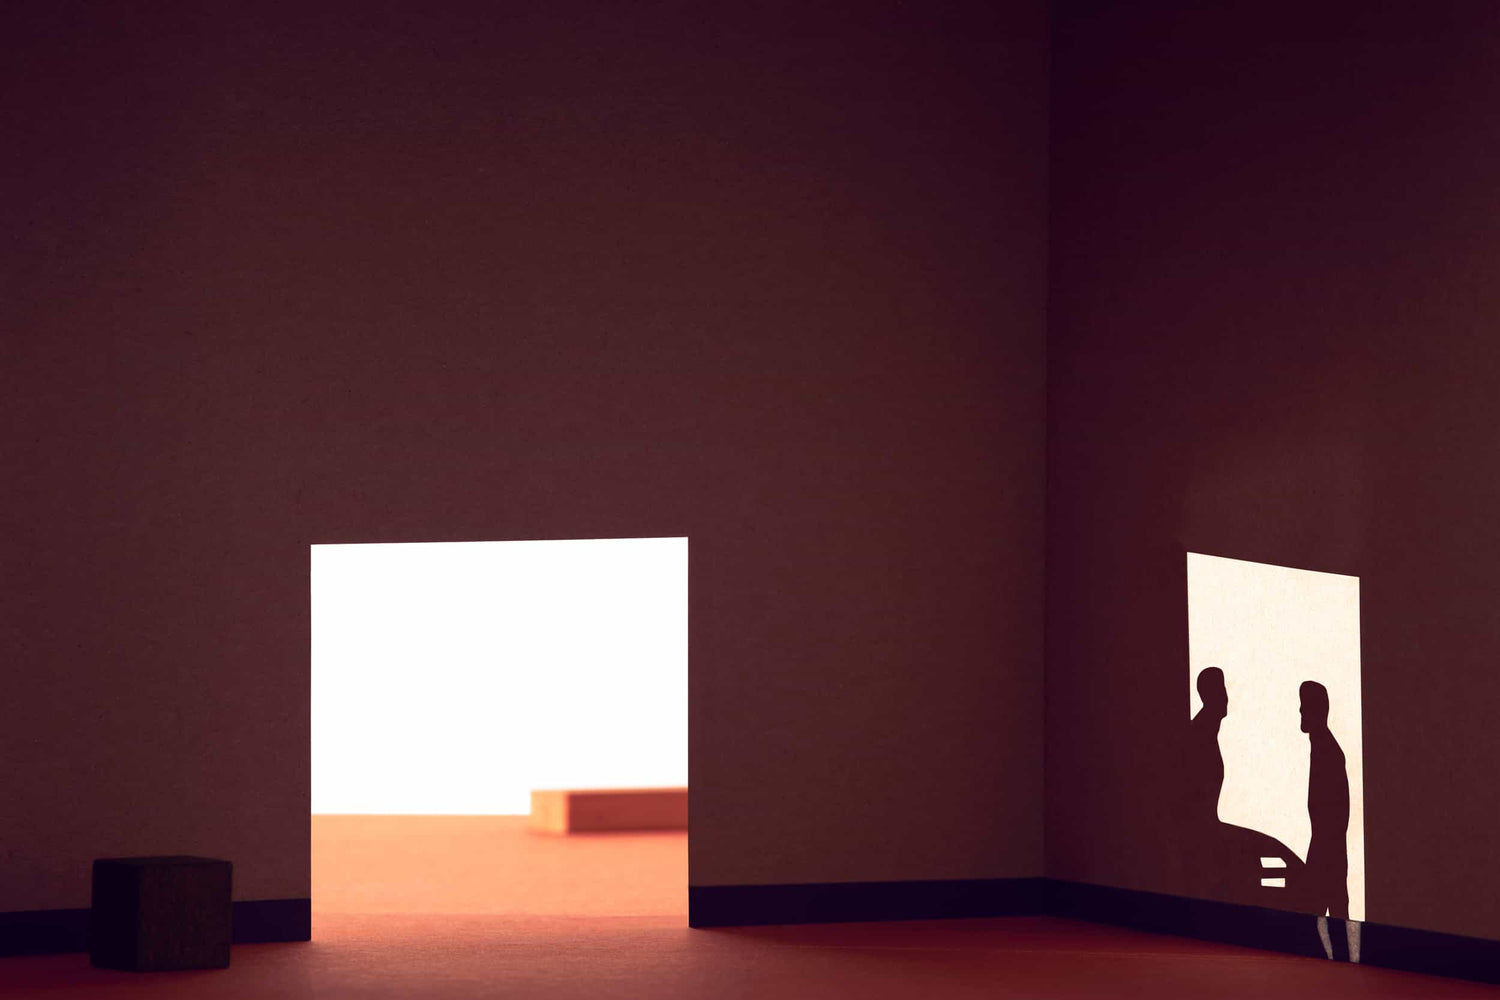 The artpiece 'Boys will be Boys' by Thomas van Schaik which shows a shadowplay in a room made from cardboard, with two men sitting and standing in a lighted area.